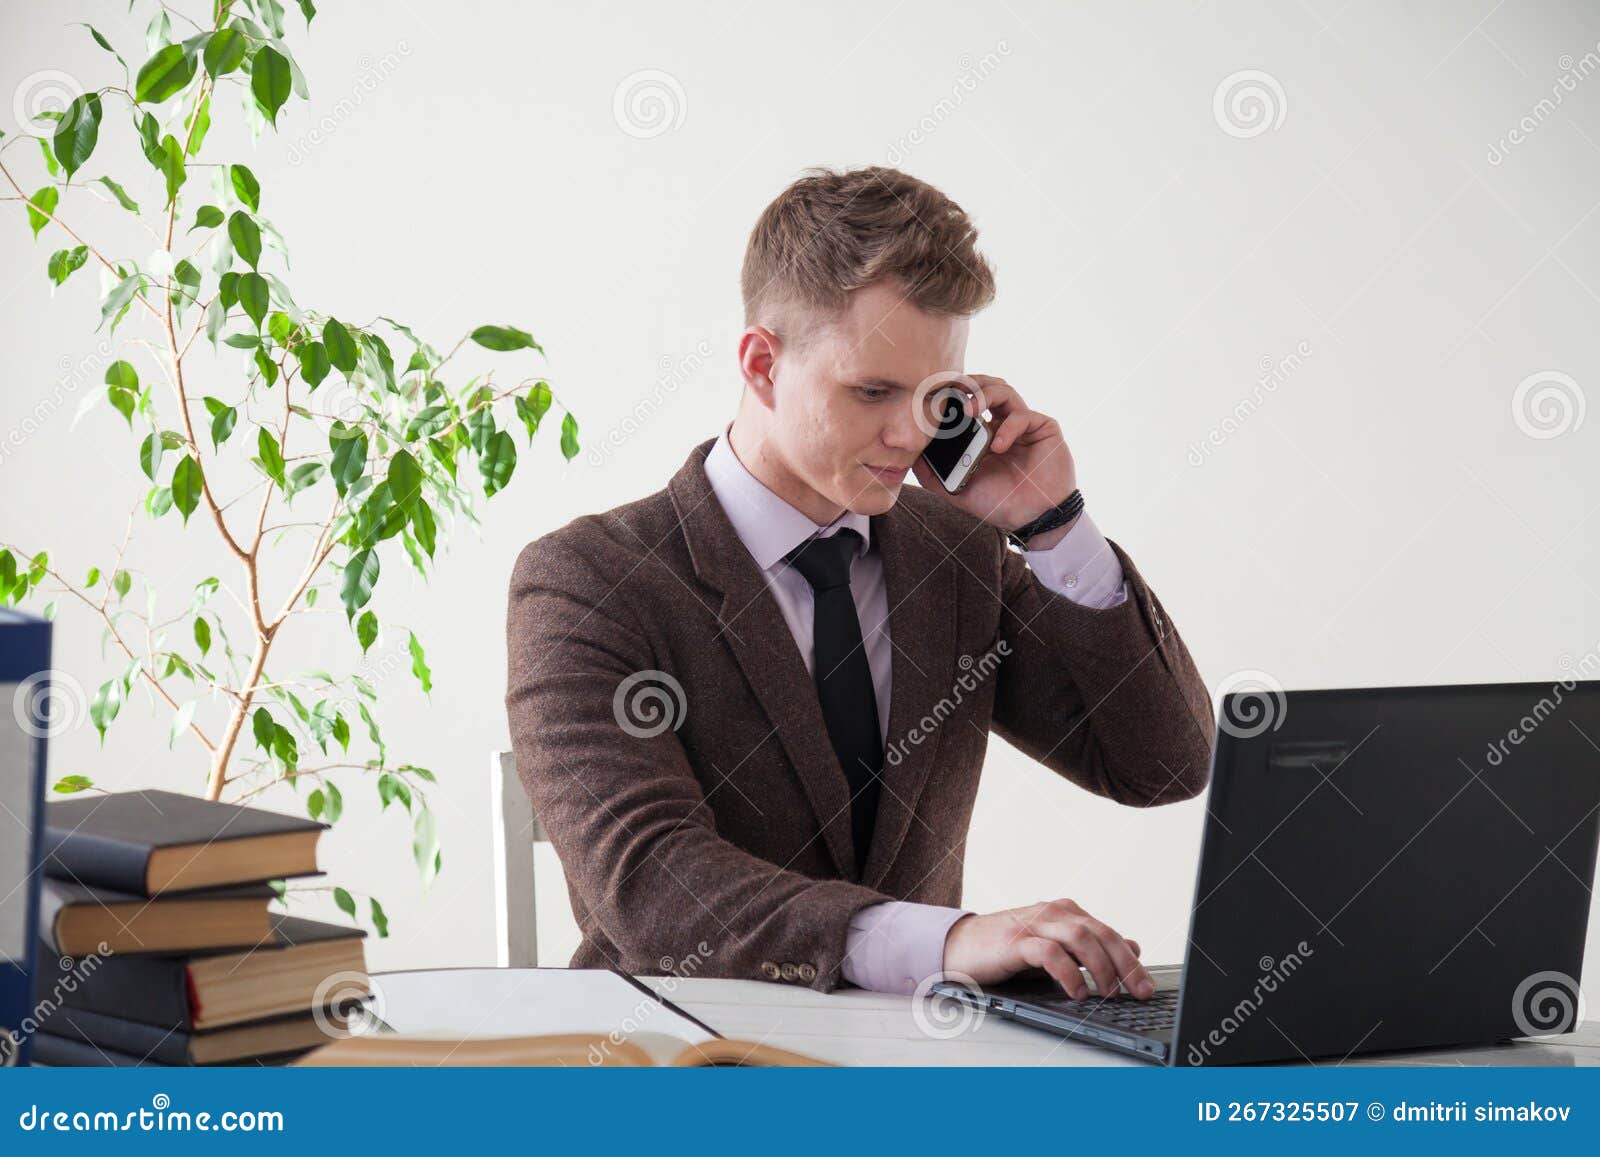 a business man works at a desk in an office space. a man works at a desk in an office space